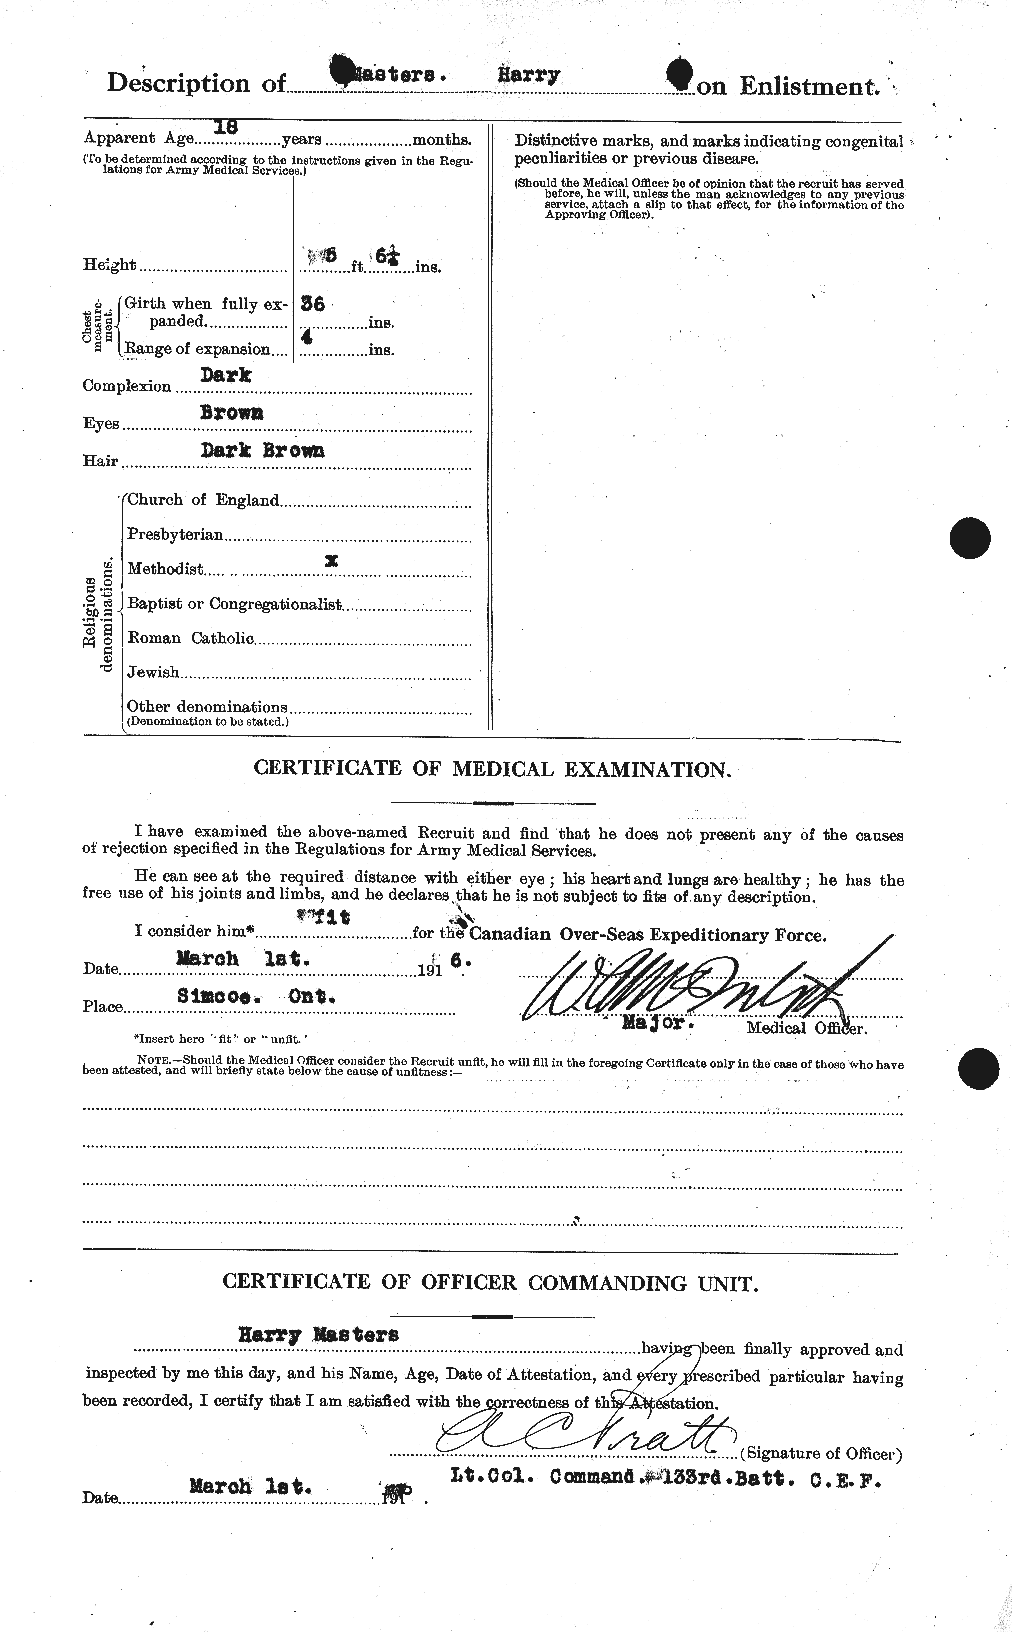 Personnel Records of the First World War - CEF 487336b